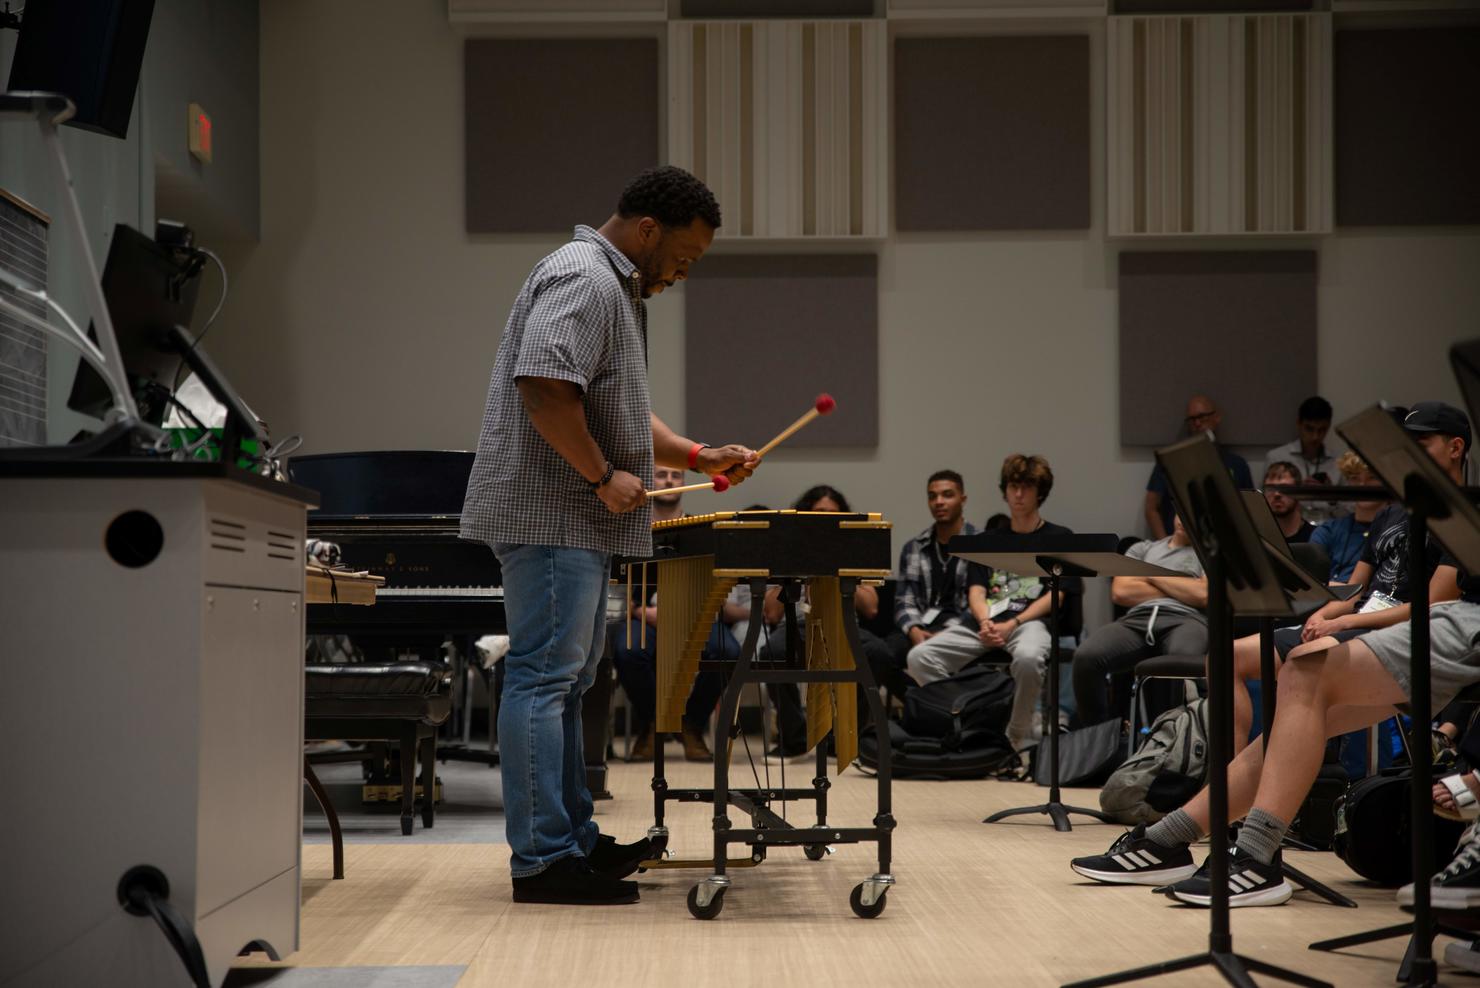 Special guest artist Warren Wolf teaches a masterclass to campers at Mason Jazz Camp in a music rehearsal room. He plays the vibraphone for students